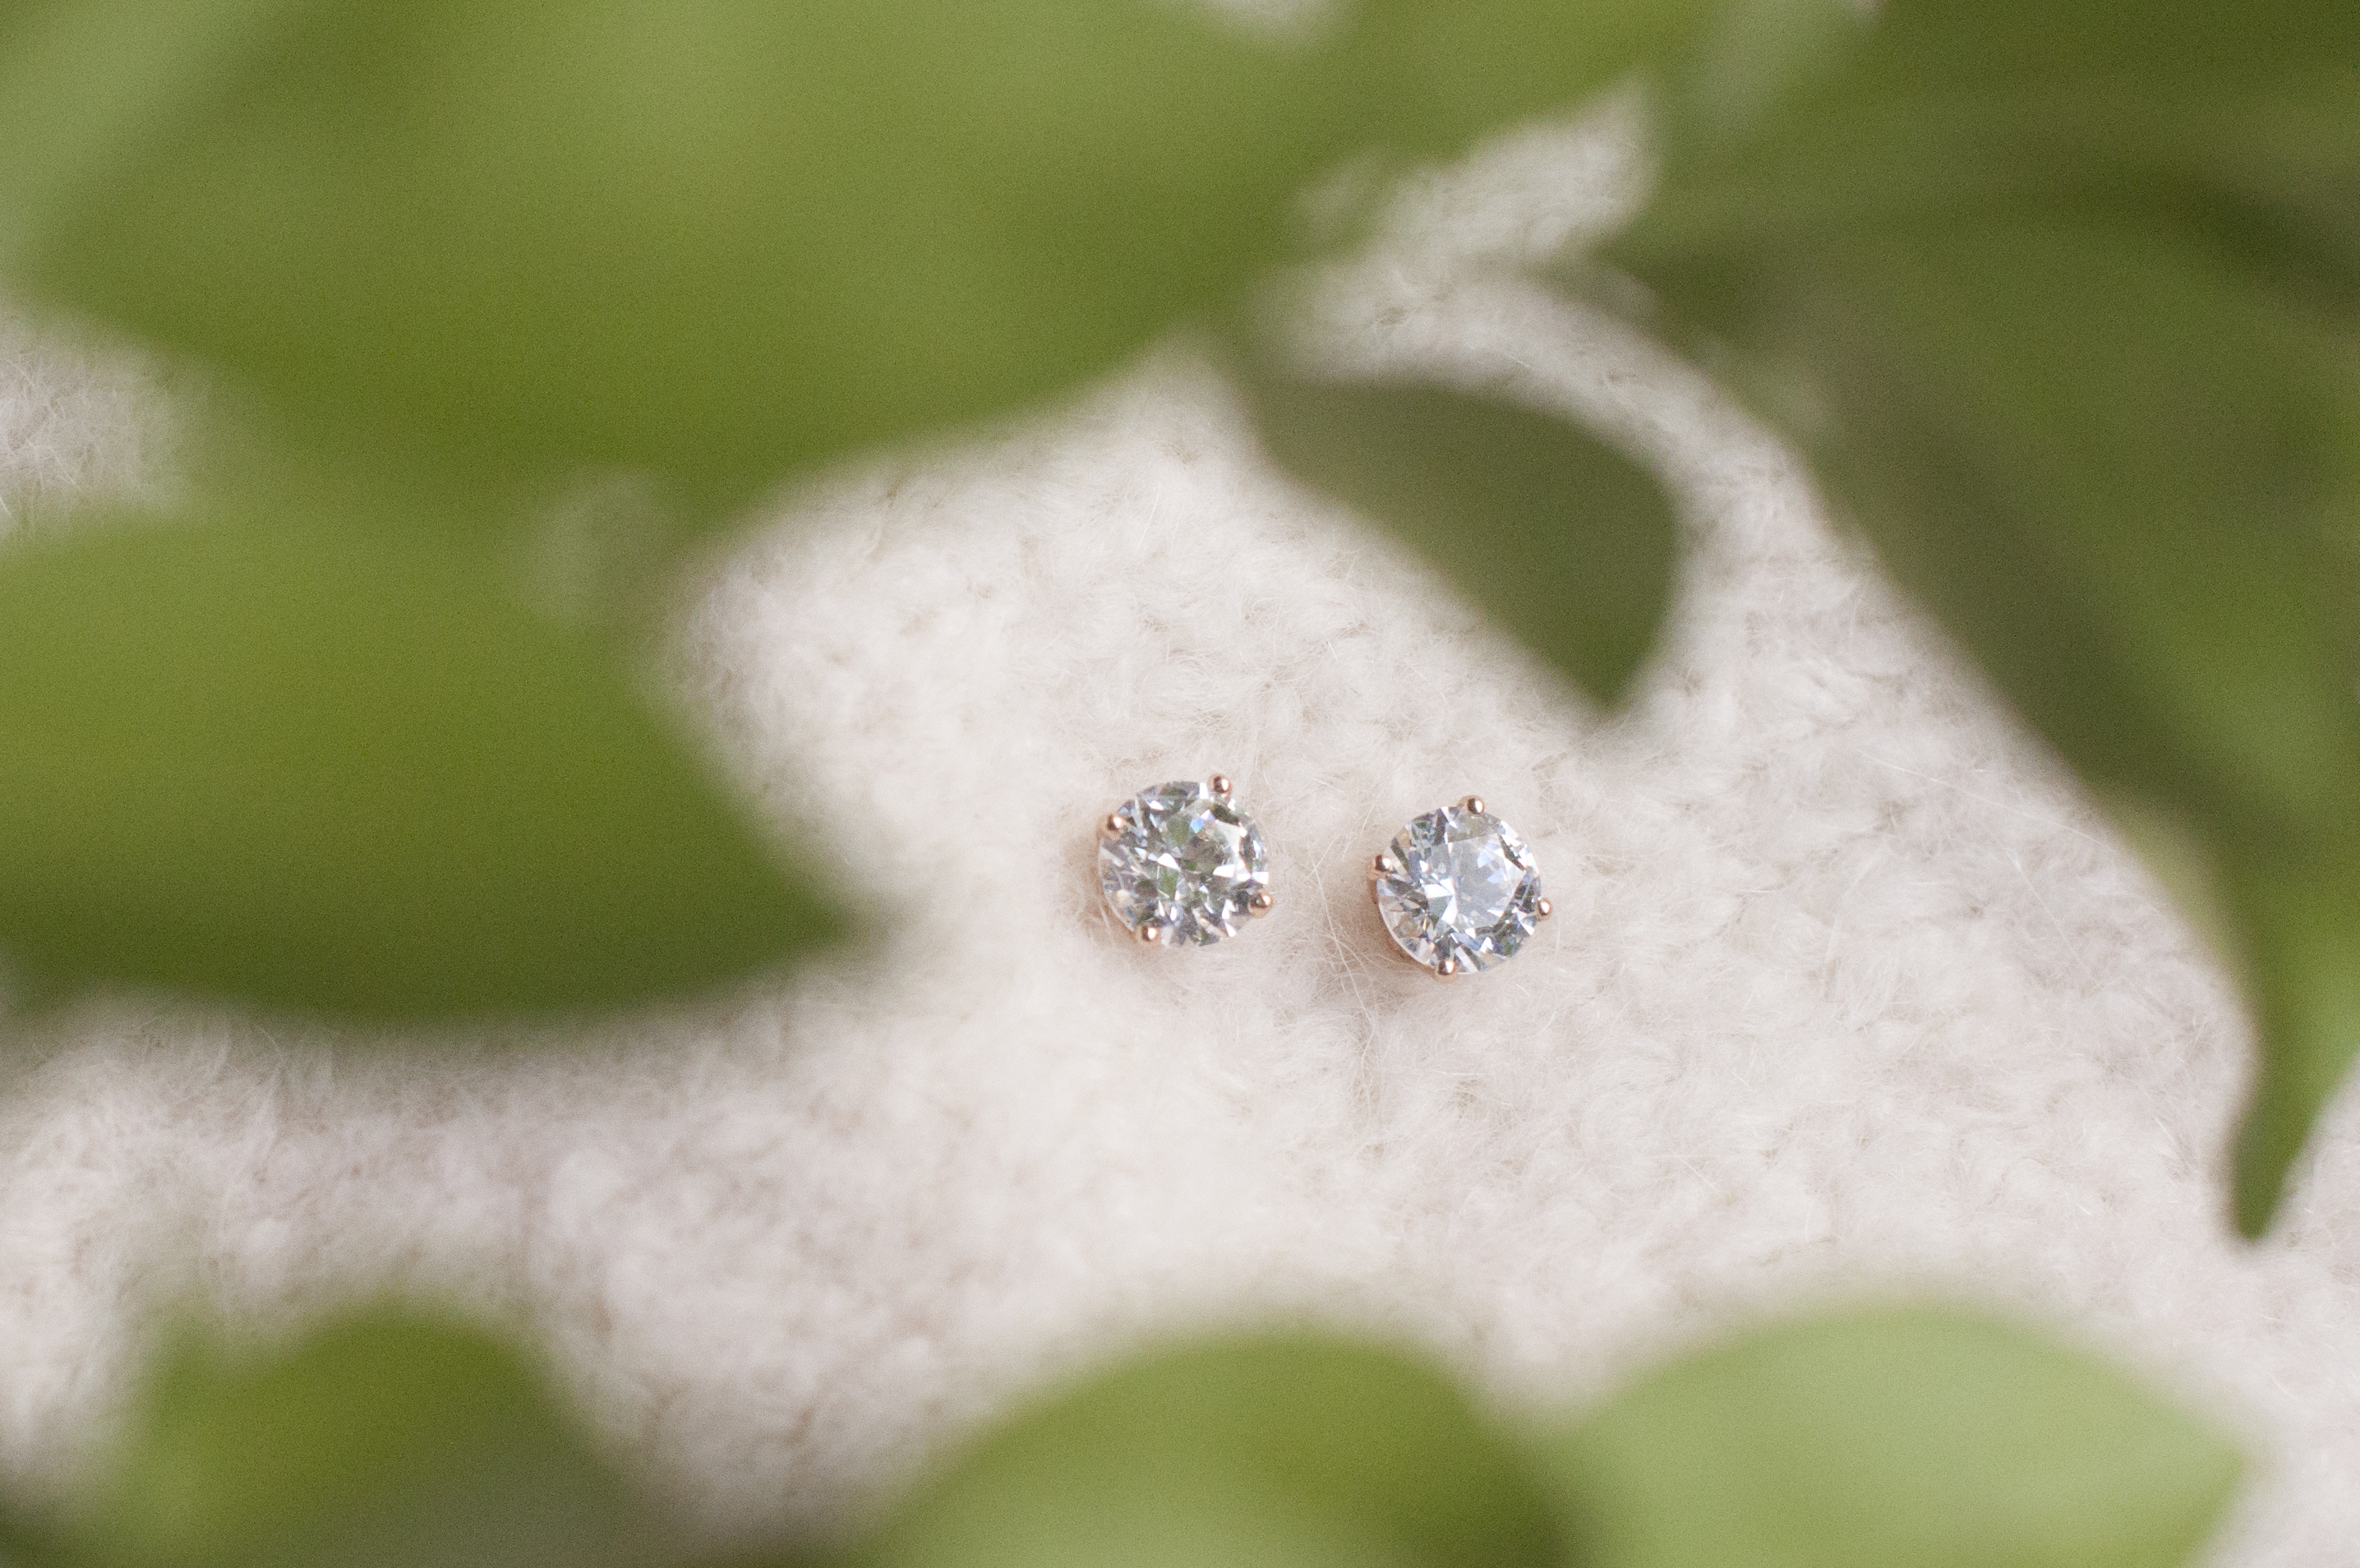 DIAMONDS AT THE BEST PRICE FROM SUNNY DIAMONDS!